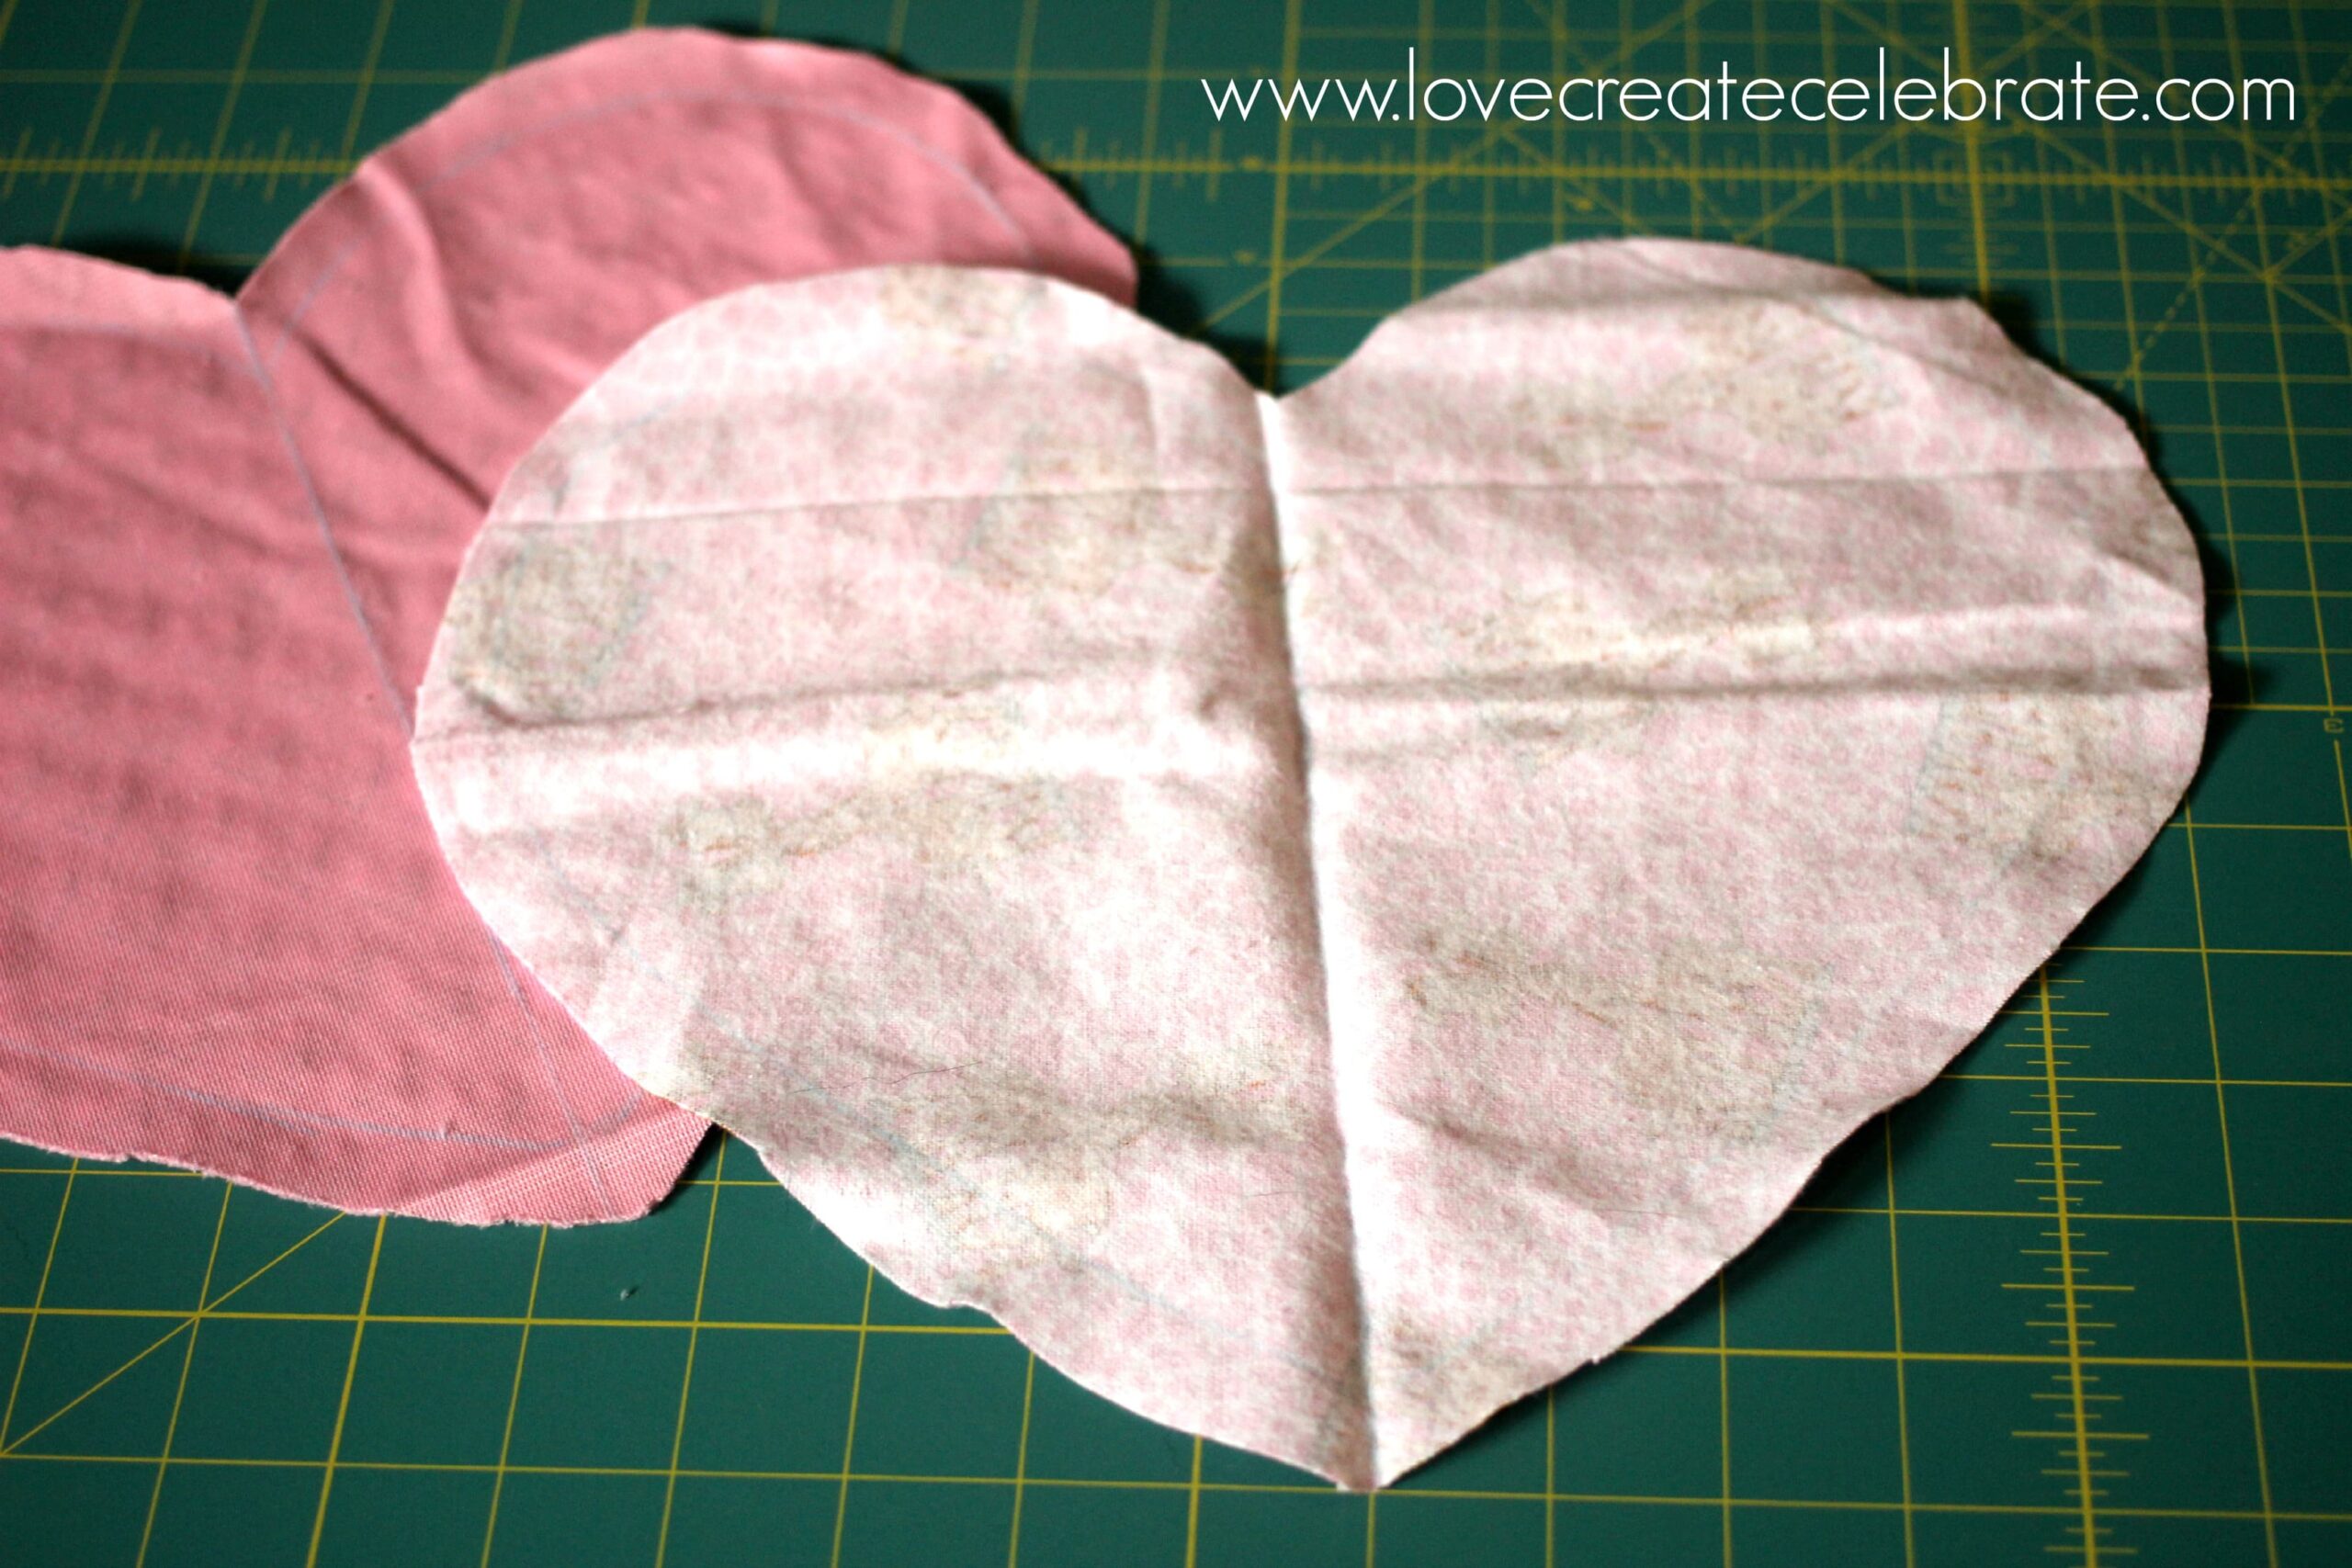 Now it is time to start assembling your heart taggie blanket.